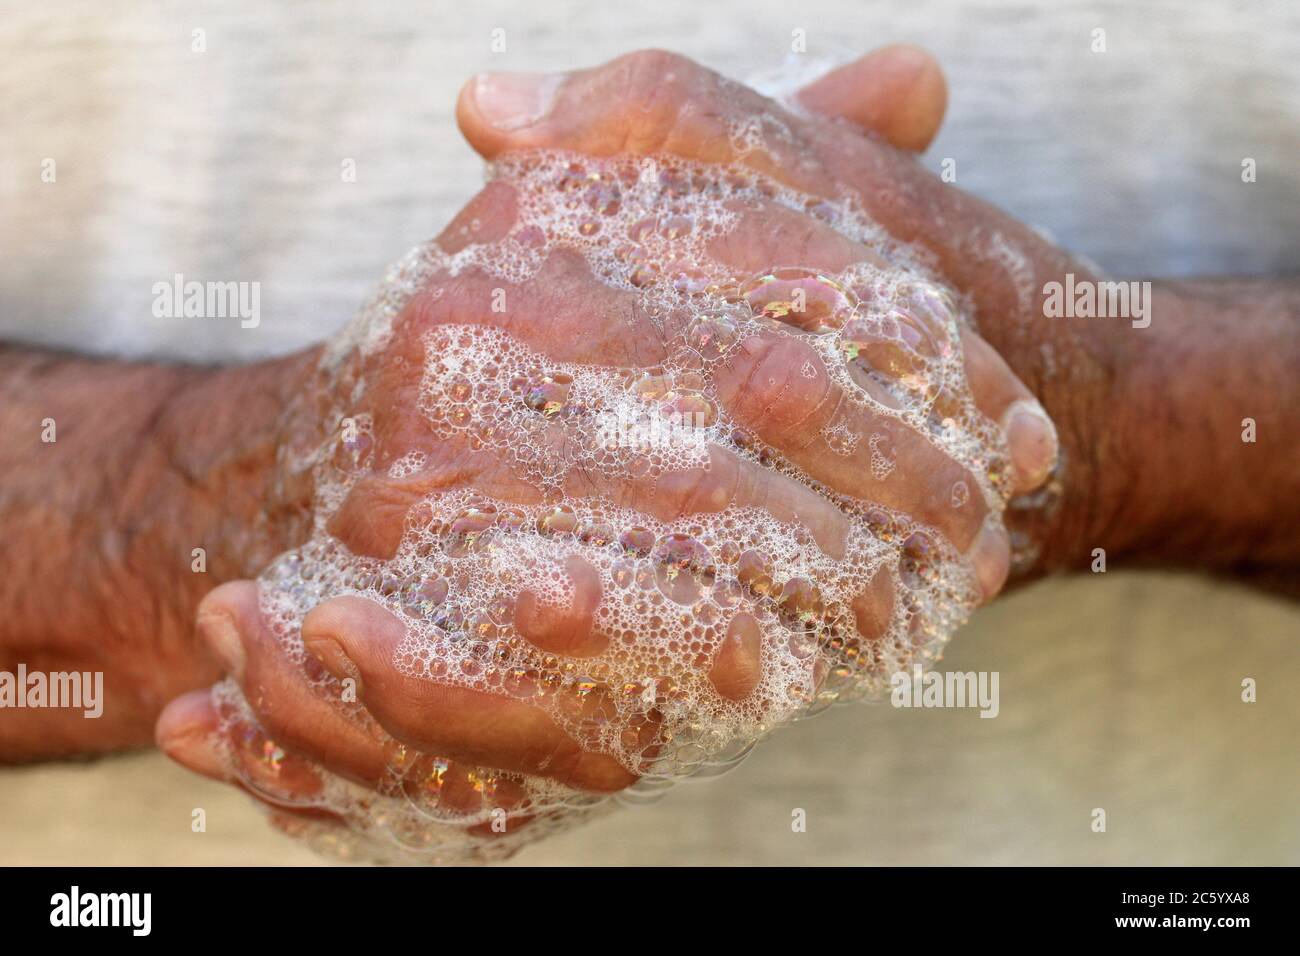 Cleaning hands. Stock Photo